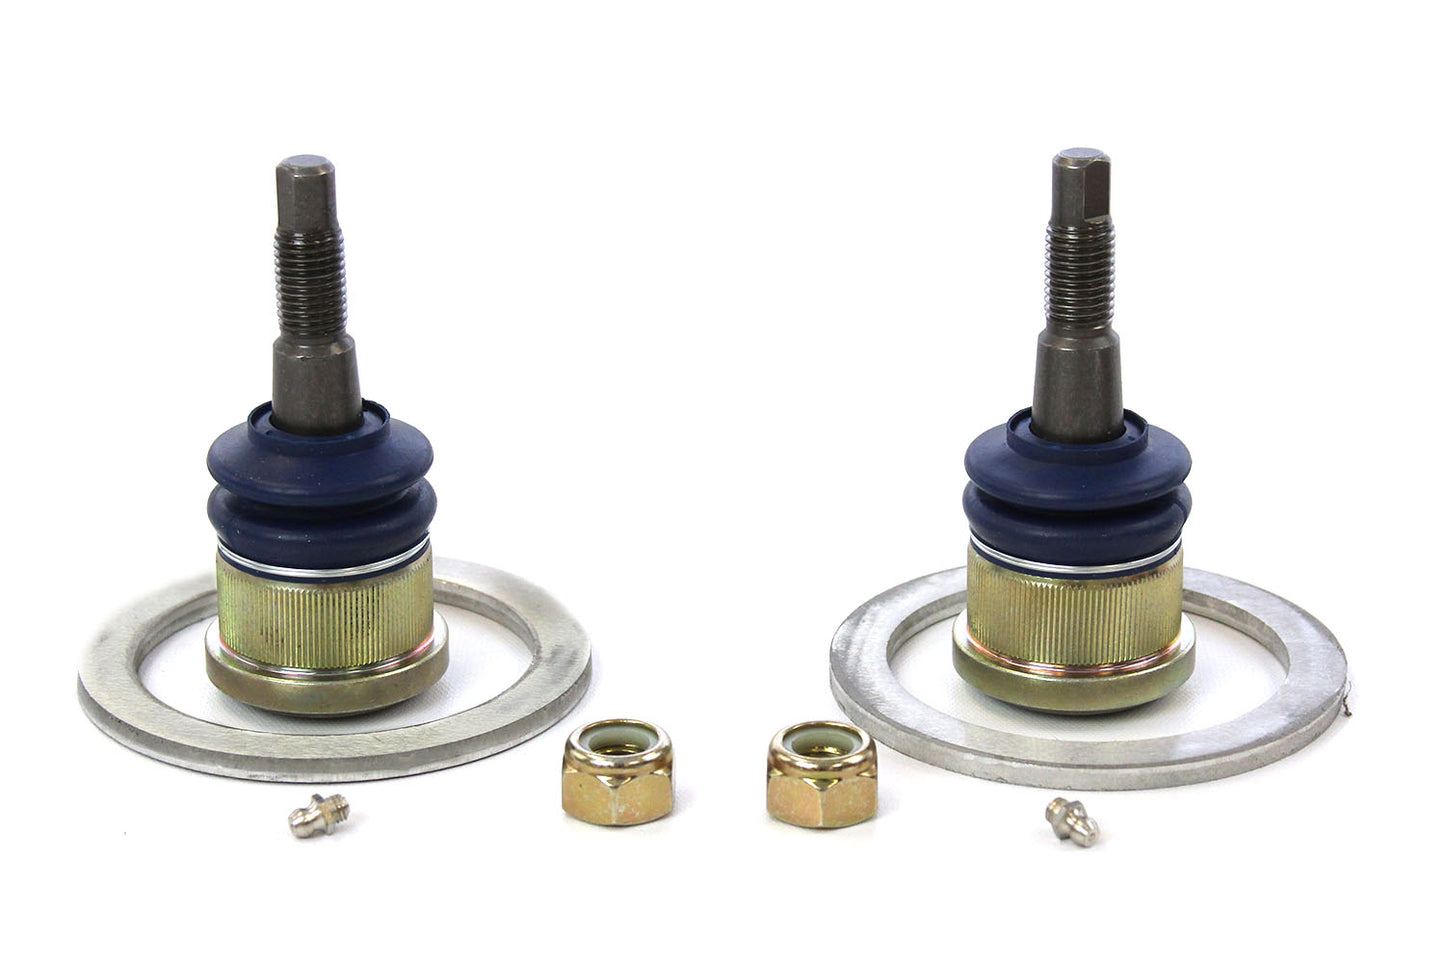 X2 Balljoint Kit (Pair, with spacers)